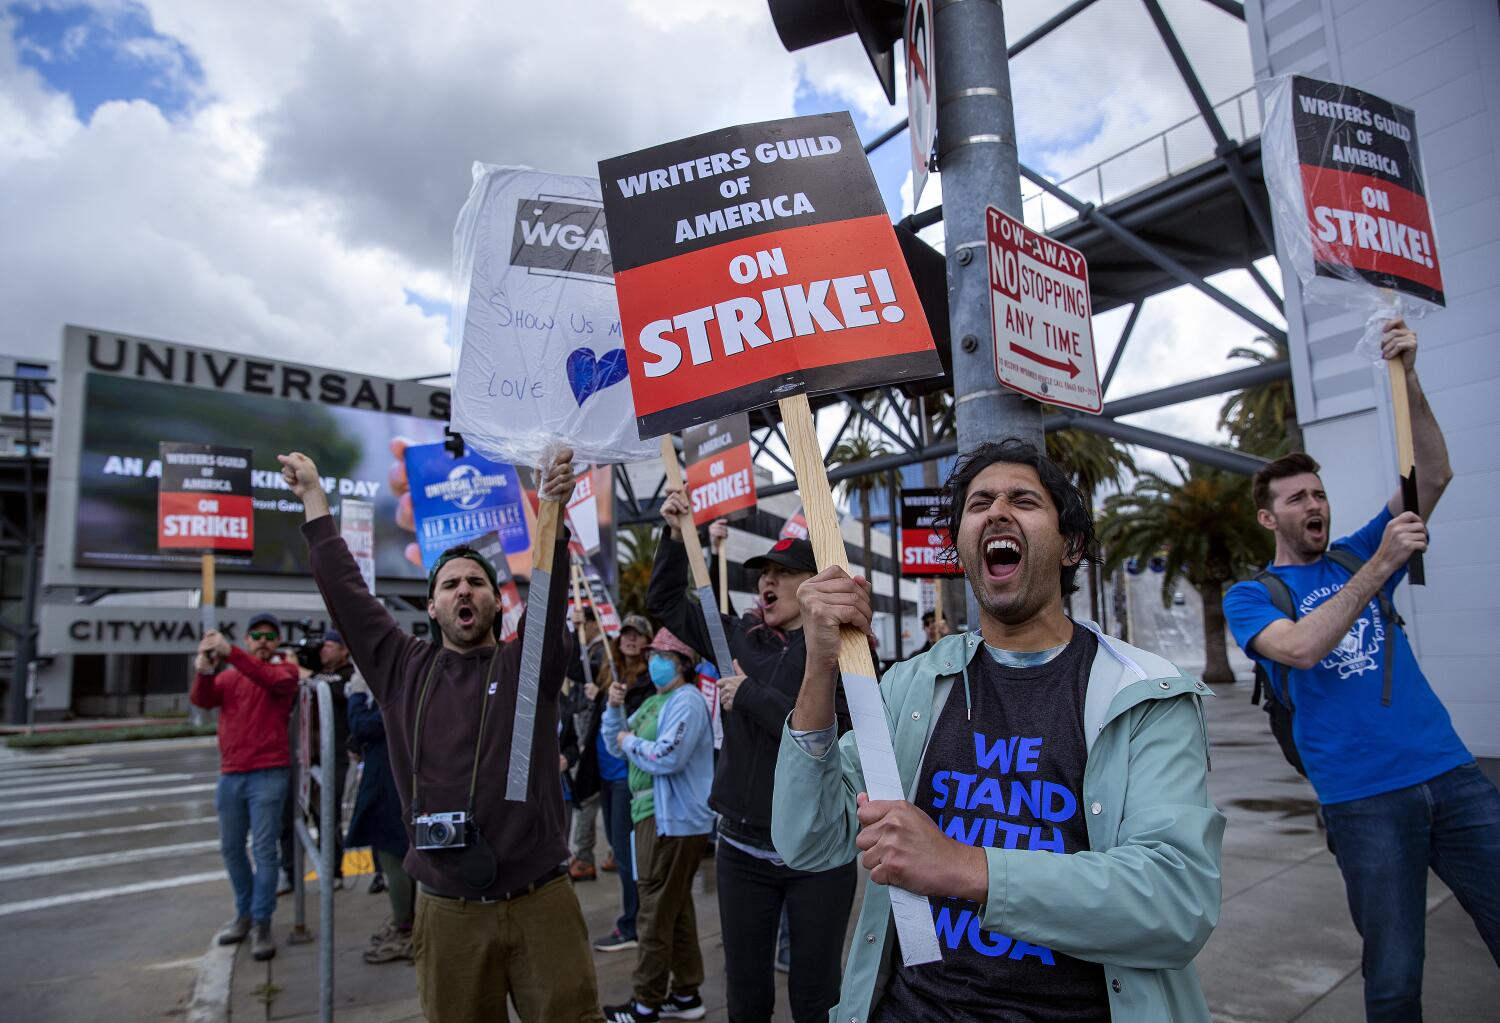 False starts, secret talks: Insiders tell how the writers' strike ended with 'Let's make a deal'